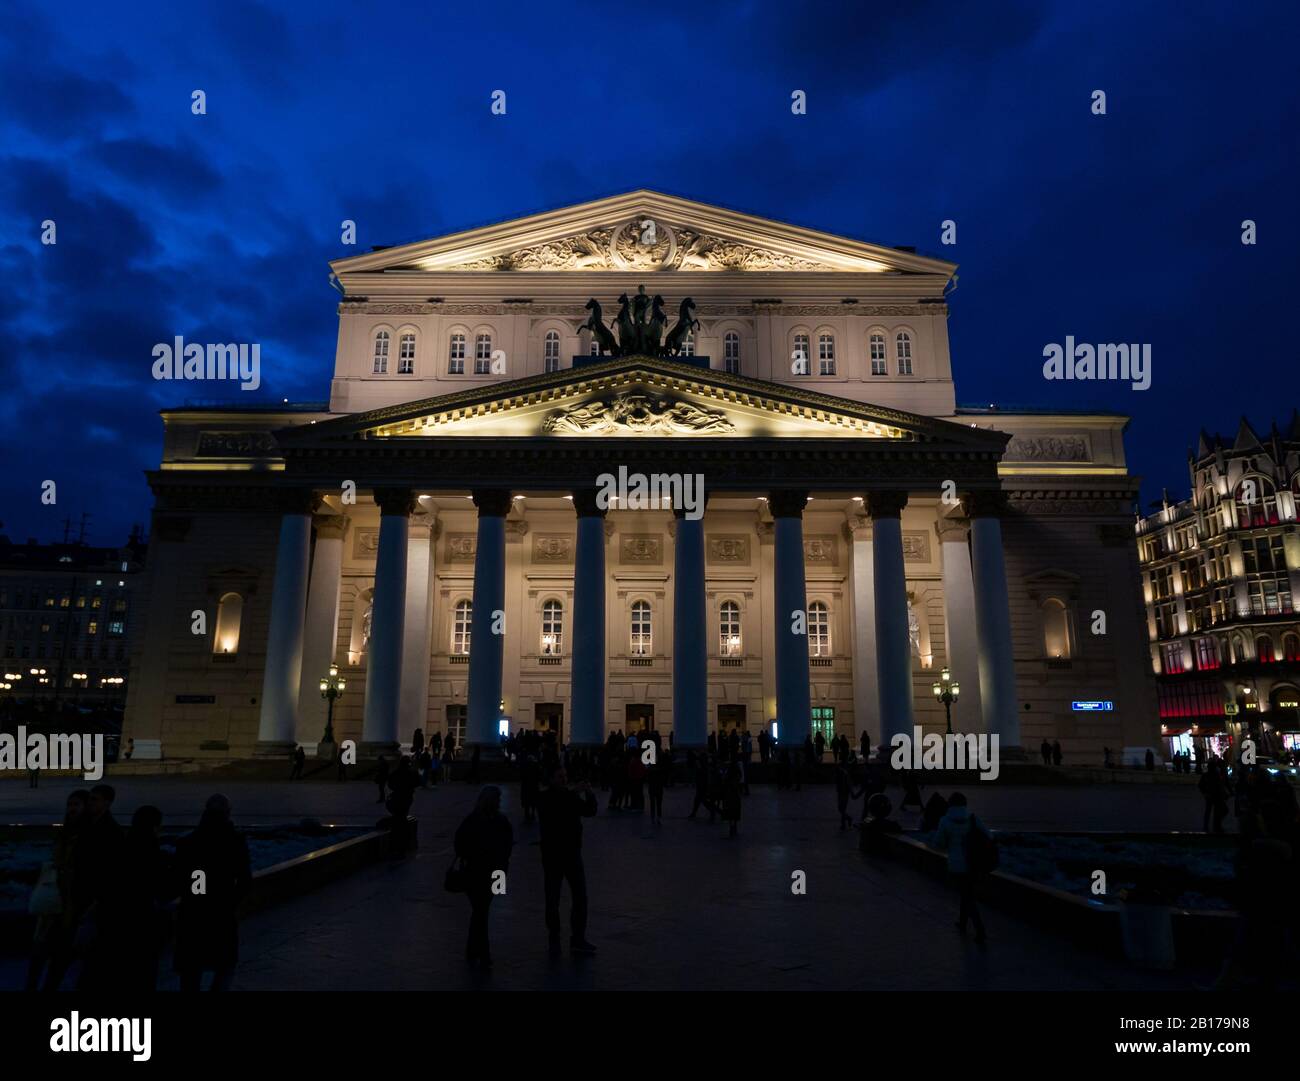 Bolshoi Theatre lit up at night with people in the square, Theatre Square, Moscow, Russian Federation Stock Photo